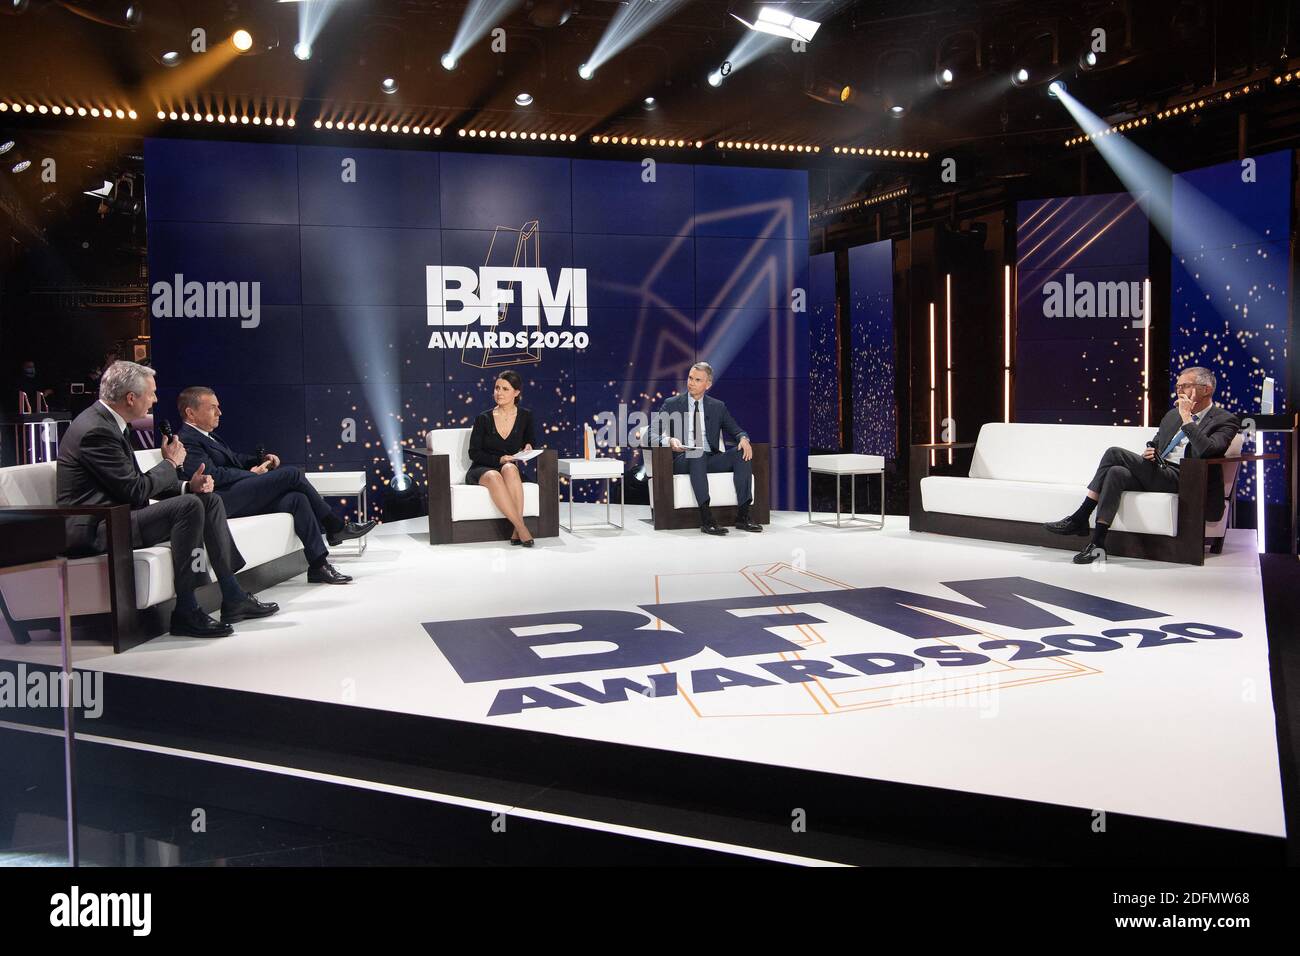 Chairman of LVMH, Bernard Arnault receives the Manager of the decade award  ( Manager de la Decennie ) during the BFM Awards 2020 ceremony at BFM  studio on November 30, 2020 in